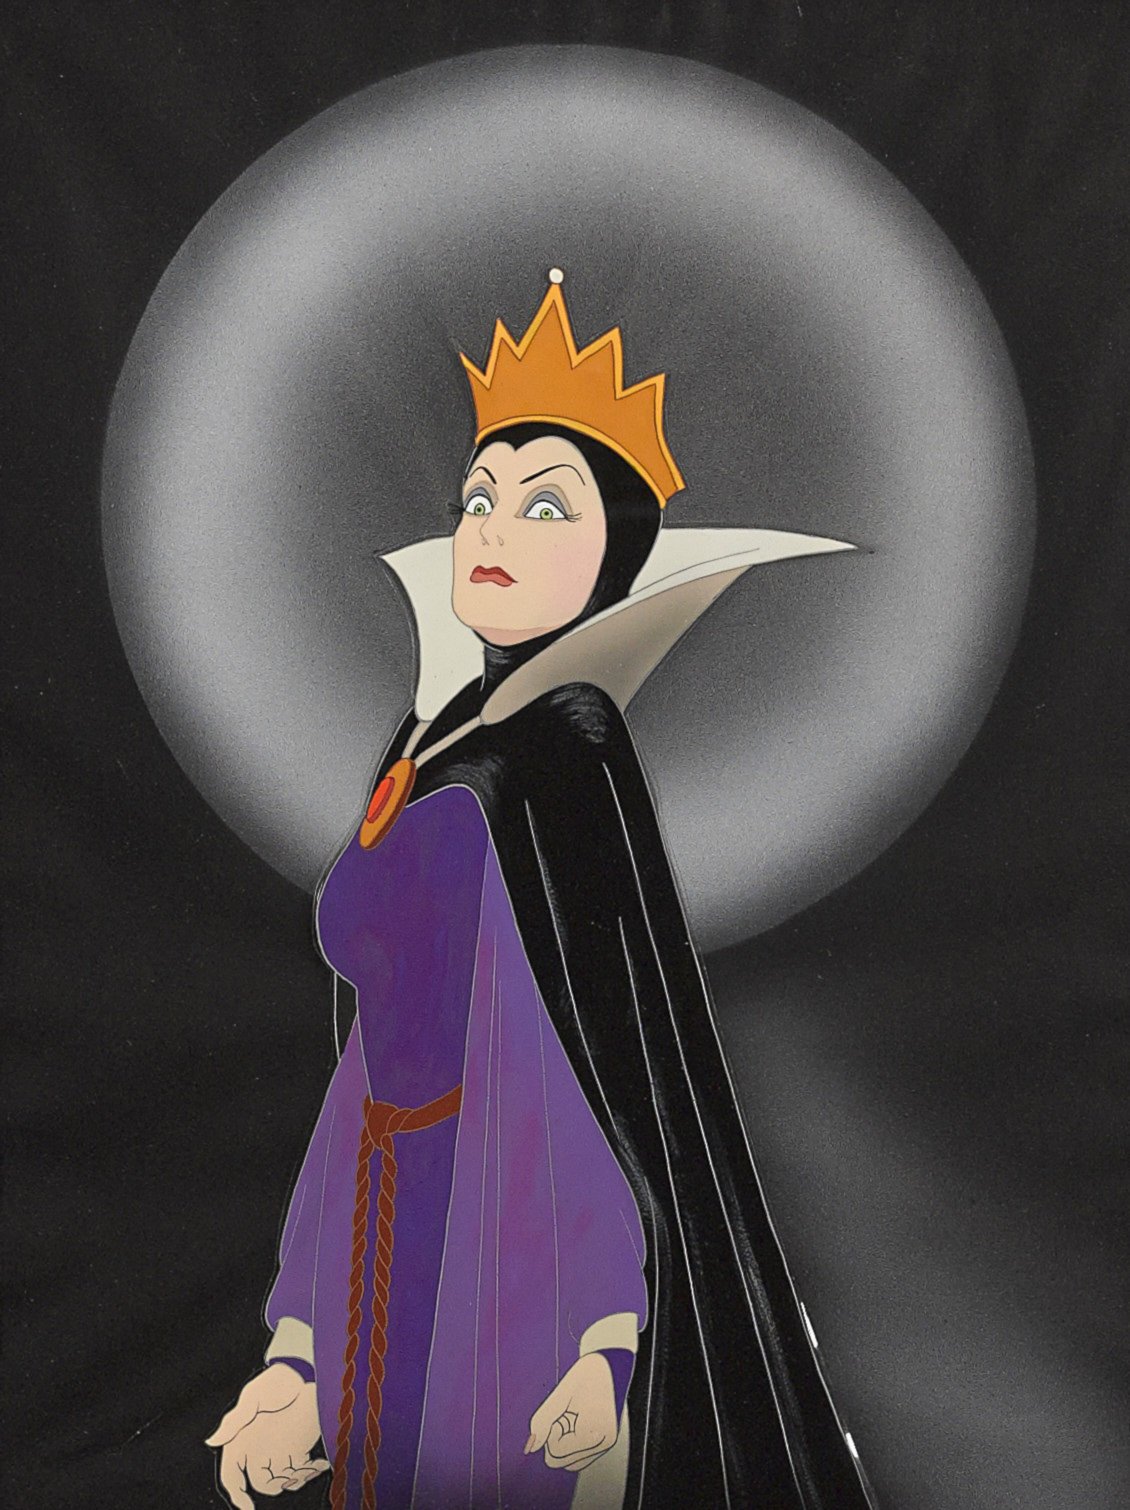 PHOTO: A celluloid of the Queen from "Snow White and the Seven Dwarfs," Walt Disney Studios, 1937. Made with gouache on trimmed celluloid, applied to a Courvoisier watercolor paper background, matted and framed. Estimate: $10,000-15,000.